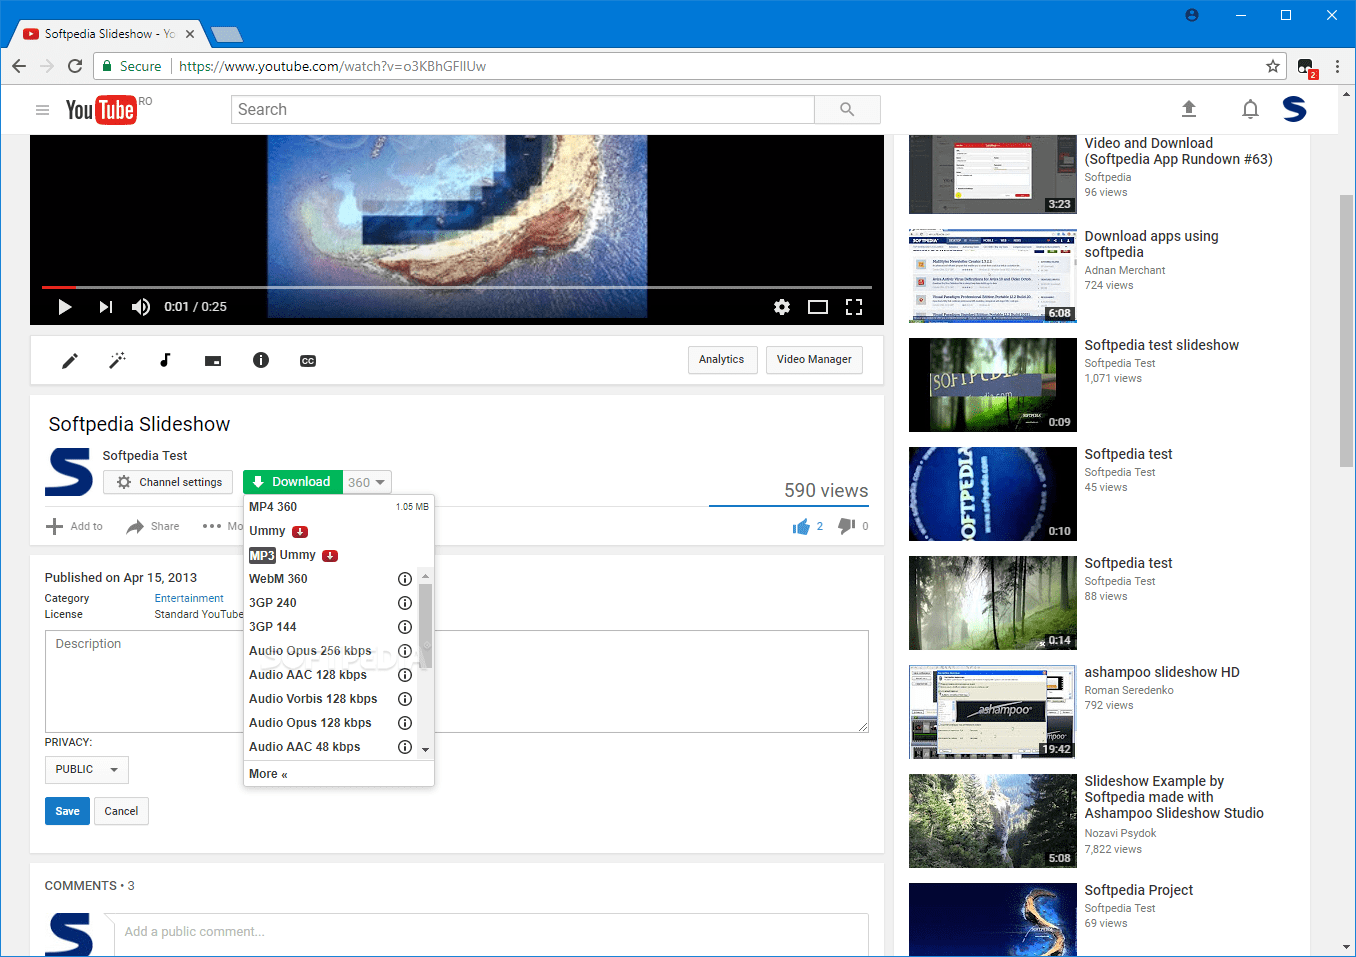 youtube downloader save from net